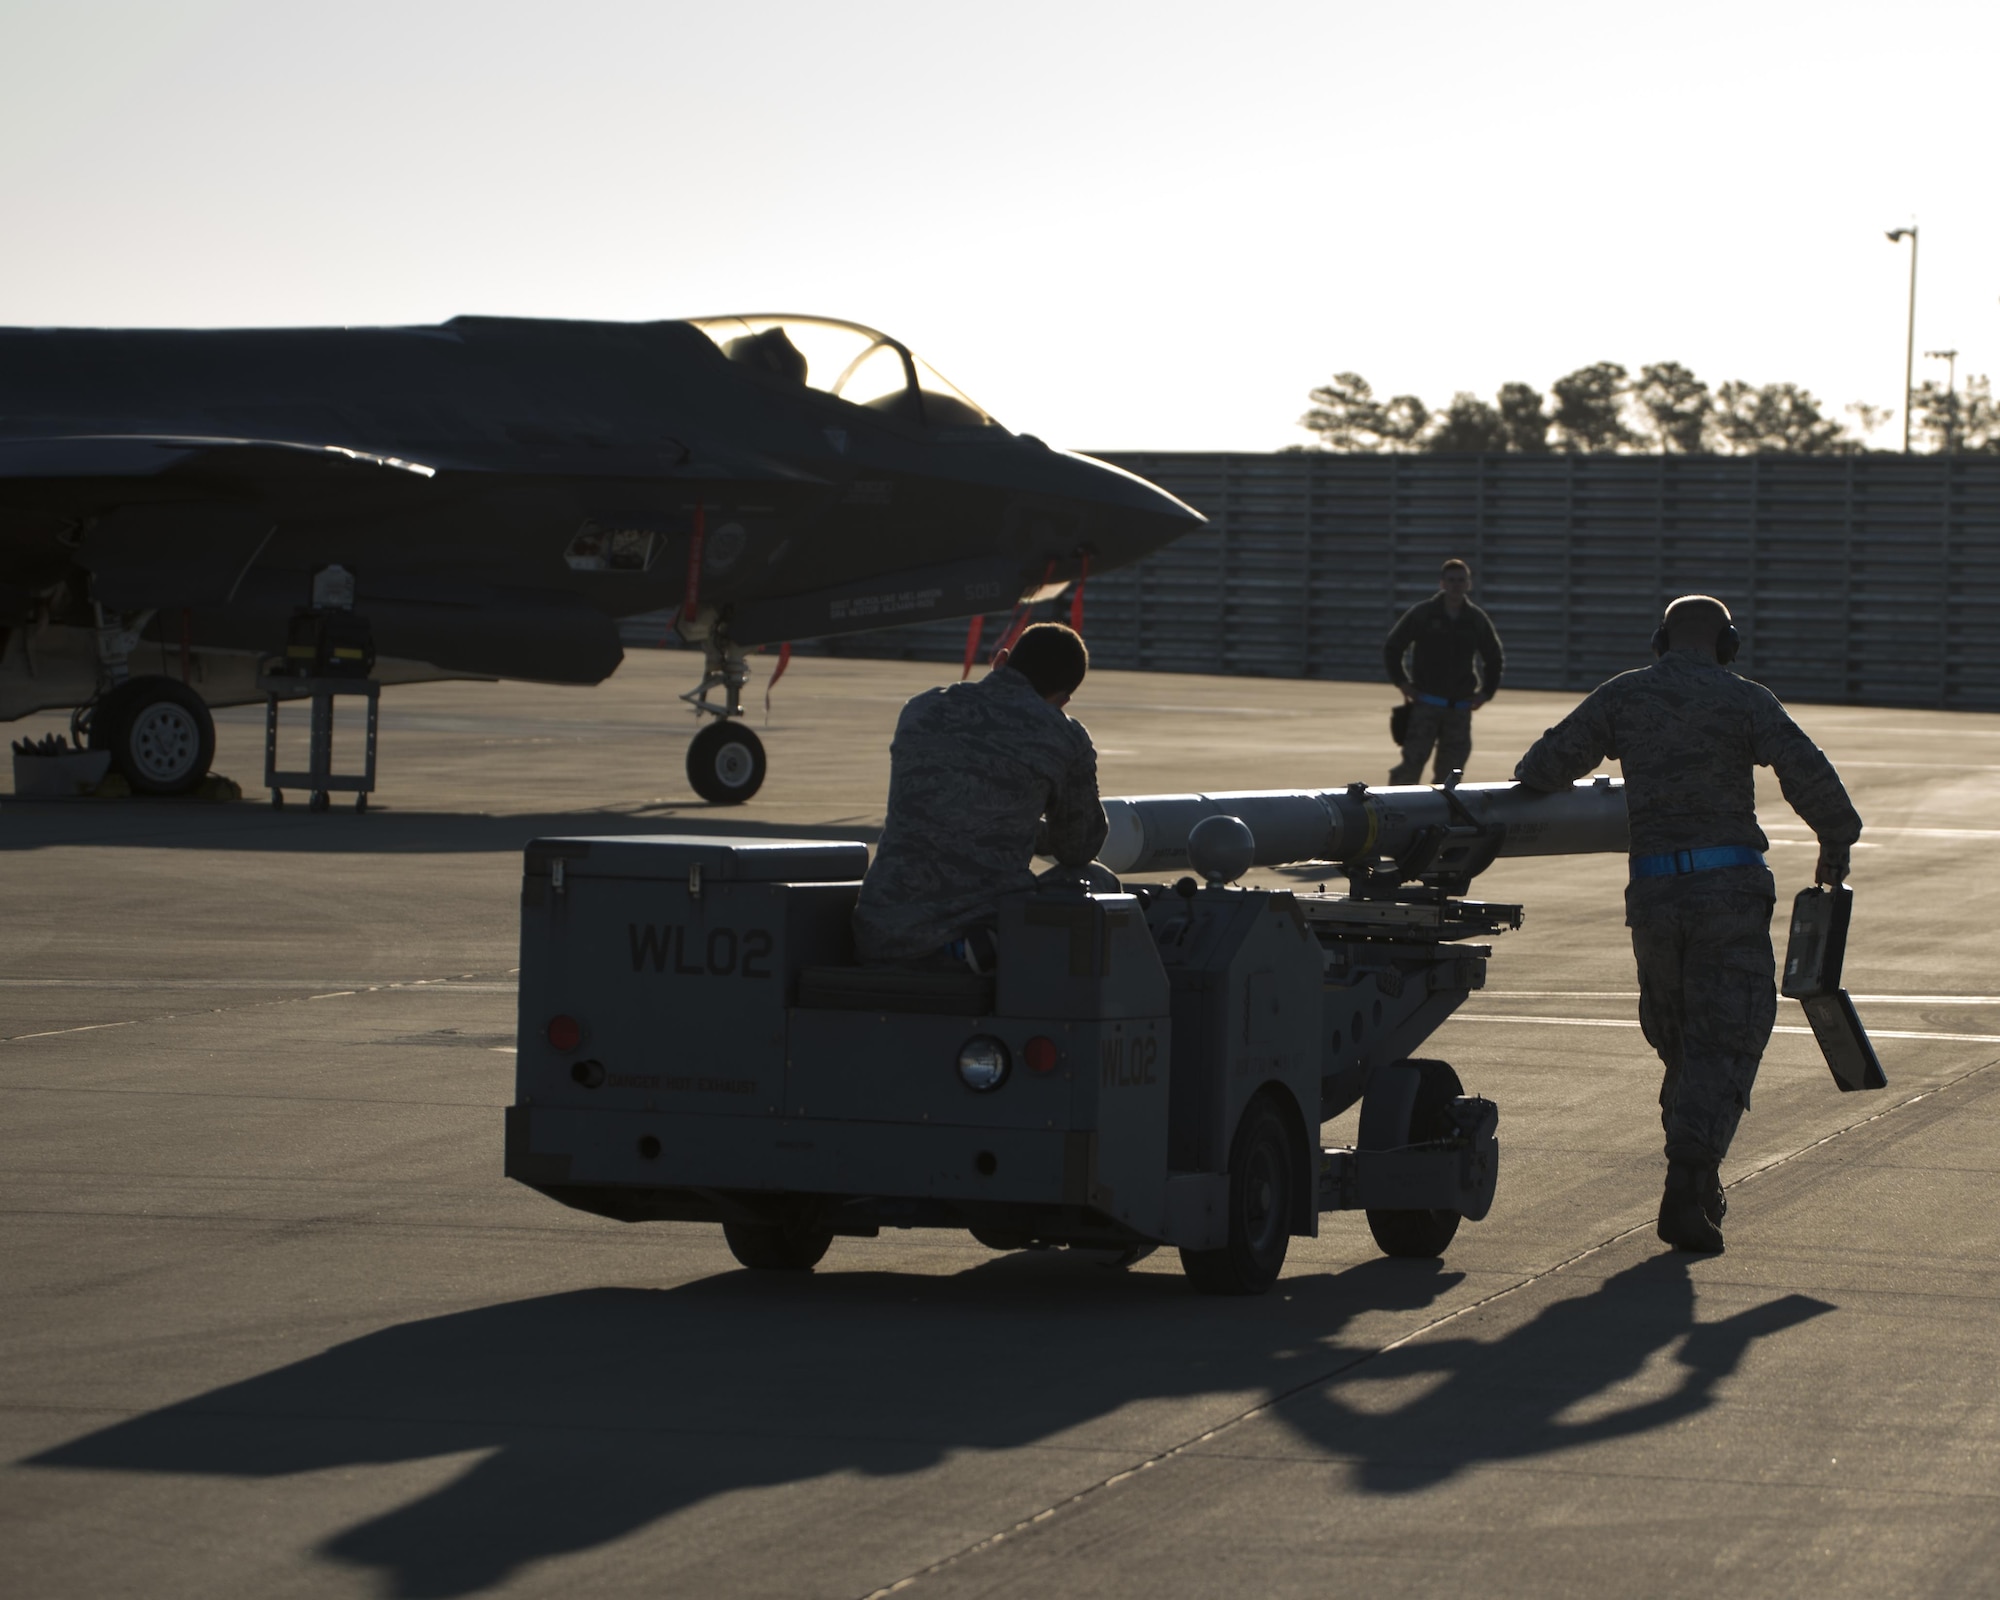 A U.S. Air Force weapons load crew assigned to the 33rd Aircraft Maintenance Squadron transports a live AIM-120 advanced medium-range air-to-air missiles (AMRAAM) before loading it into an F-35A January 31, 2017, at Eglin Air Force Base, Florida. The 33rd Fighter Wing loaded and shot the first air-to-air missiles from an F-35A during a weapons system evaluation that took place at Tyndall Air Force Base later the same day. Carrying air-to-air missiles makes the F-35 a more versatile option for combatant commanders by securing the aircrafts survivability, in turn increasing likeliness of mission success. (U.S. Air Force photo by Staff Sgt. Peter Thompson)